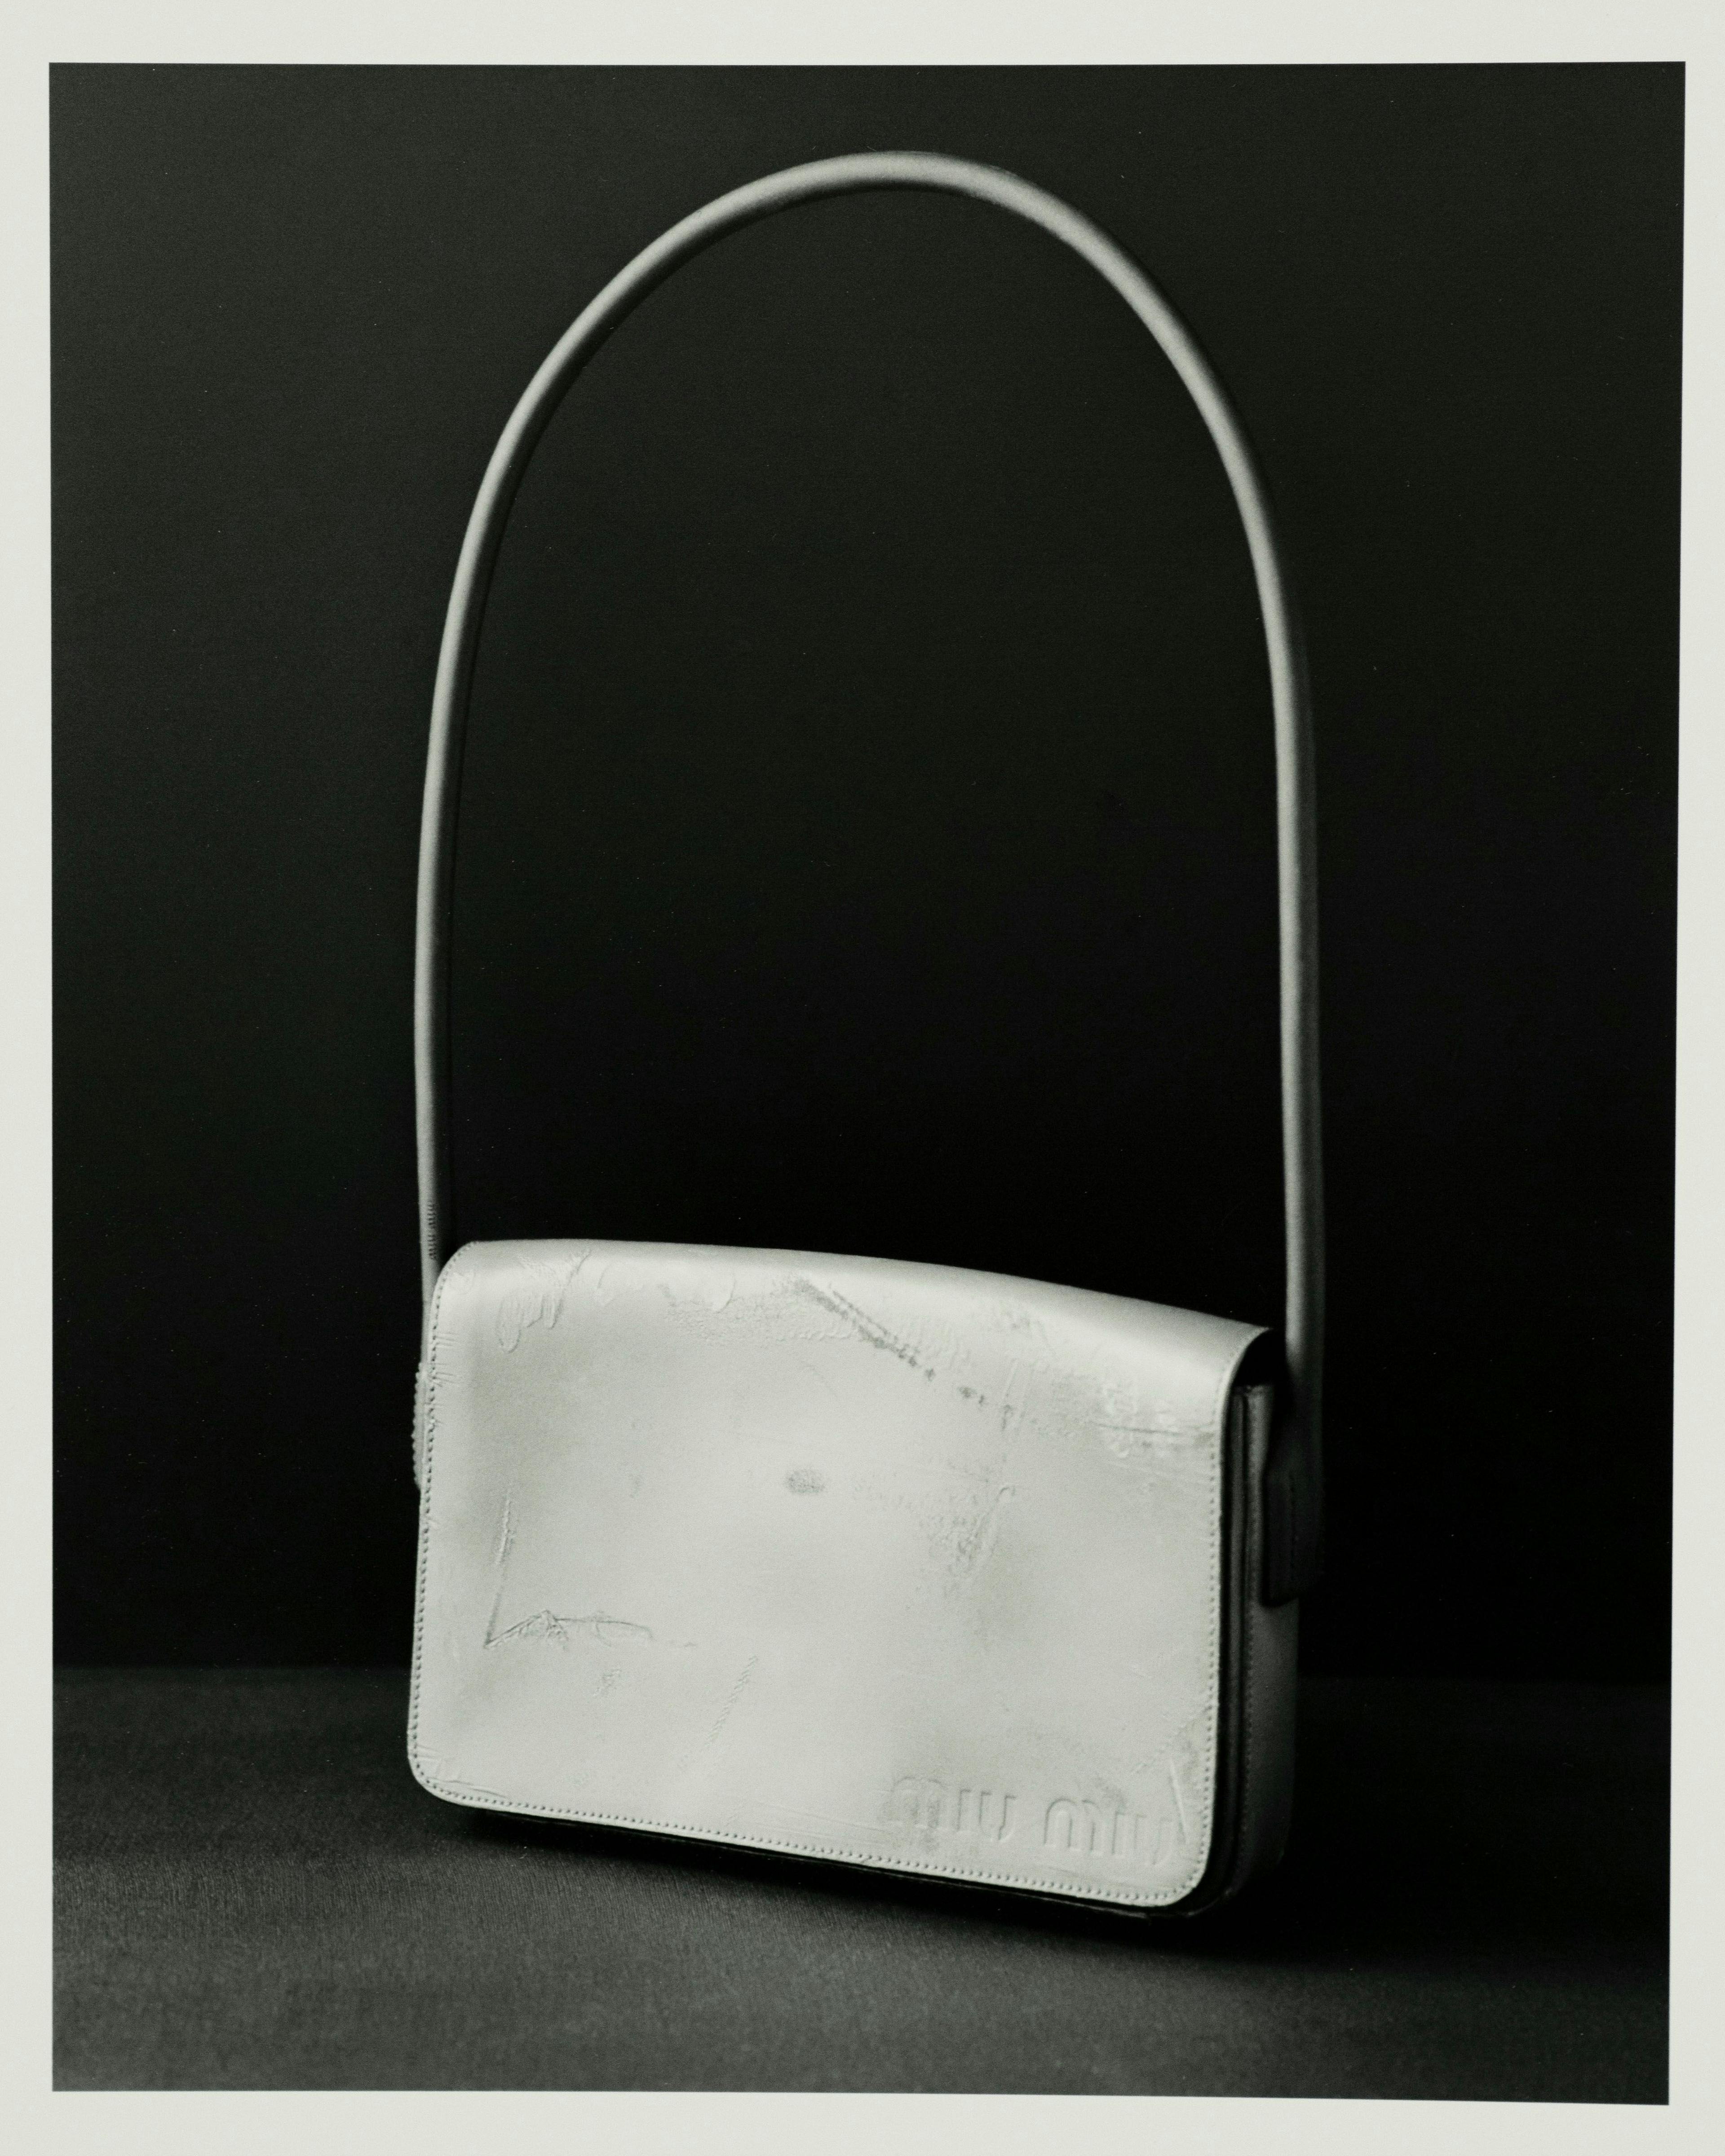 Vintage bag by Miu Miu, Fall 1998, from the David Casavant Archive. First presented with the Fall 1998 collection, this handbag represents an era of simple, ladylike silhouettes in Miuccia Prada's contemporary line.